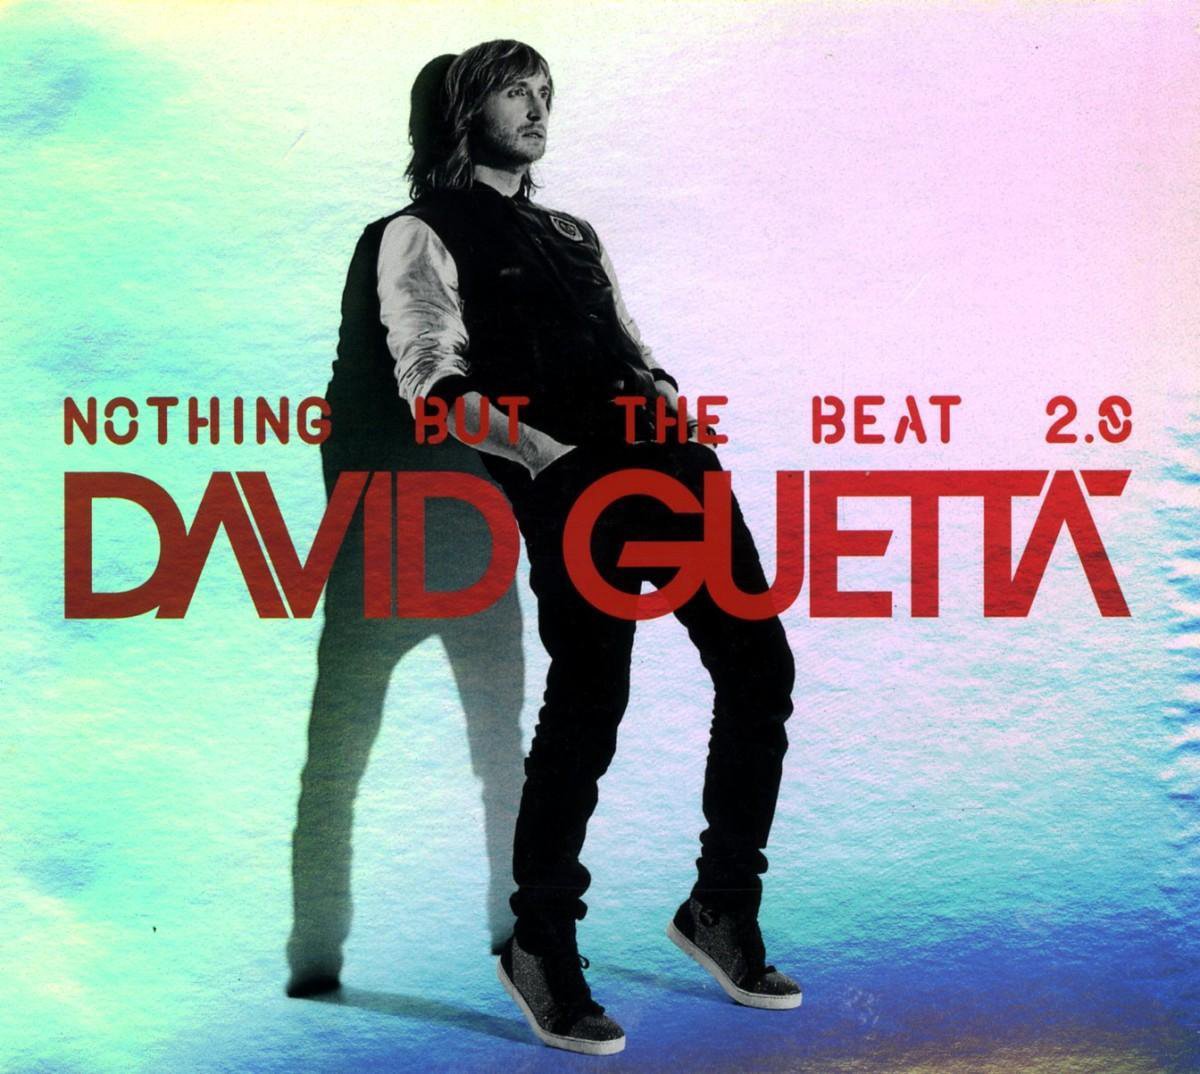 Nothing But The Beat 2.0 (One Year Anniversary Edition) - David Guetta